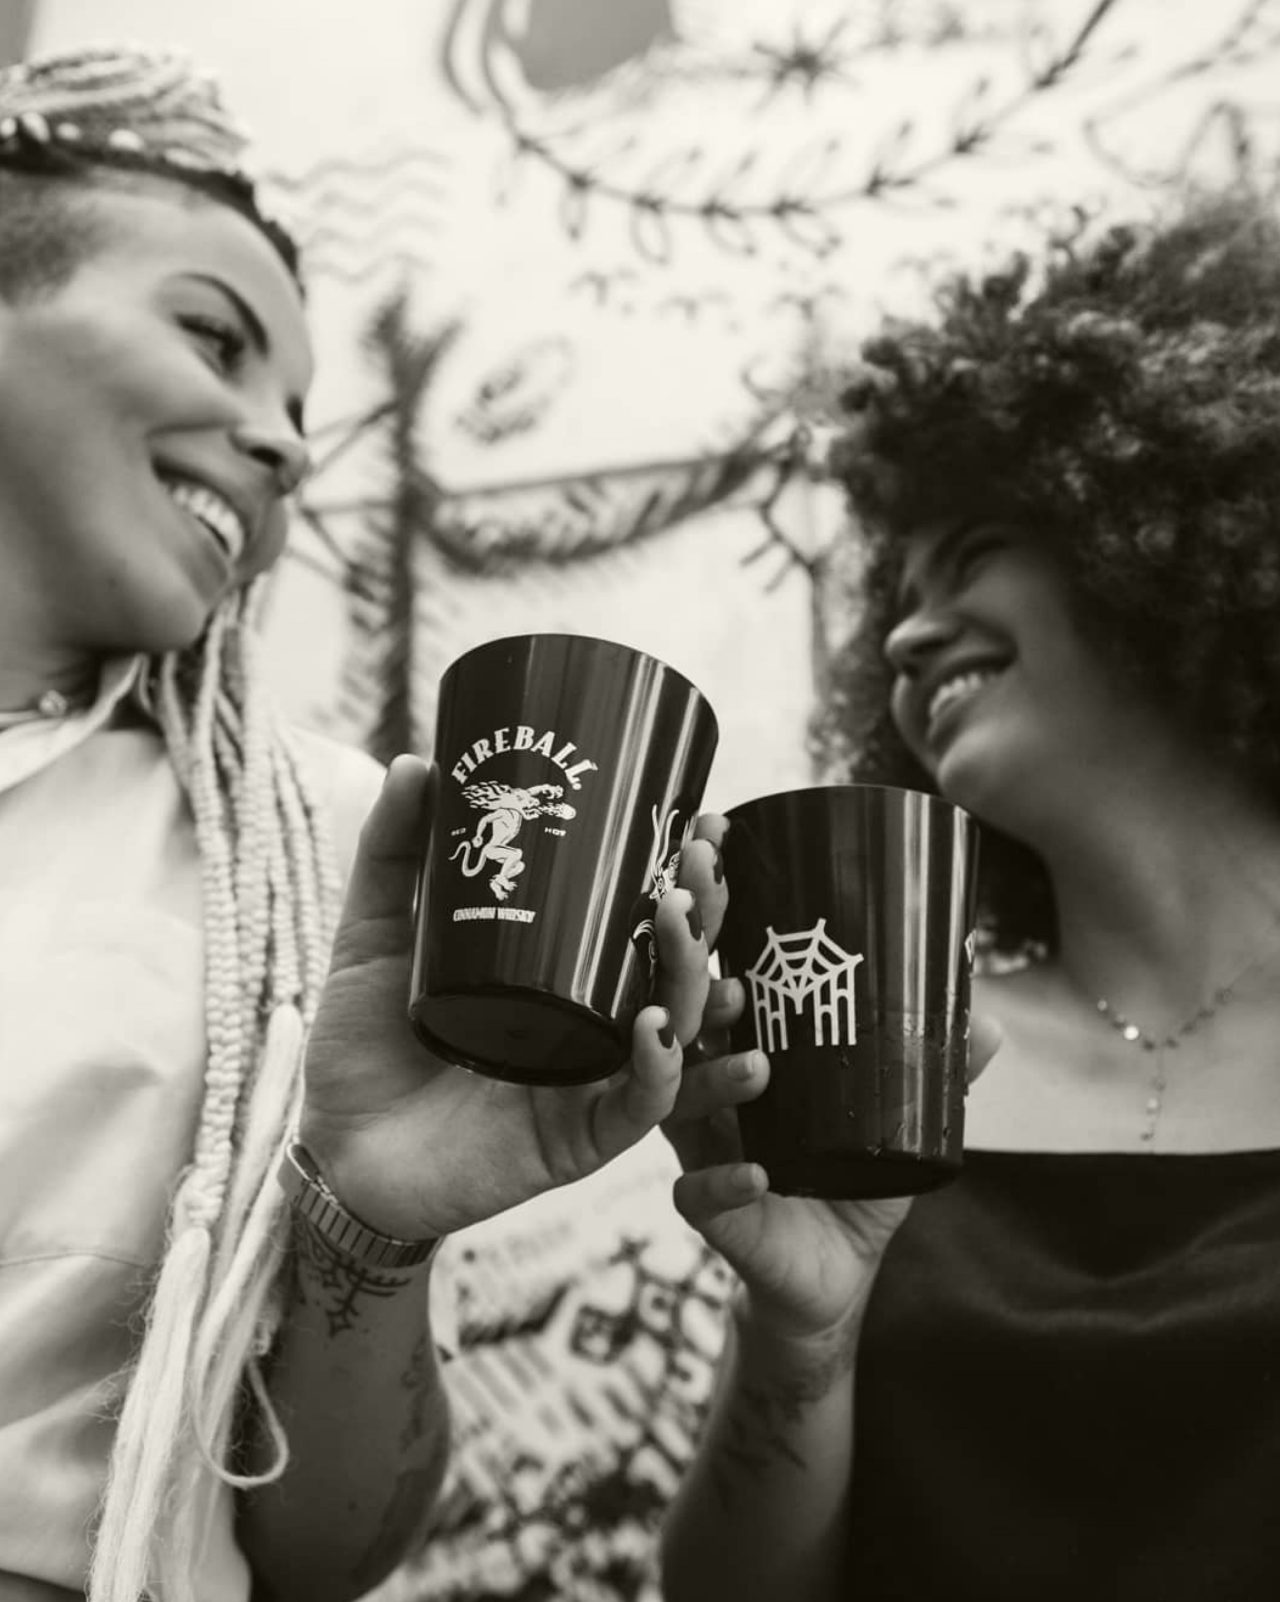 Black and white image of two women smiling and cheersing Fireball cups